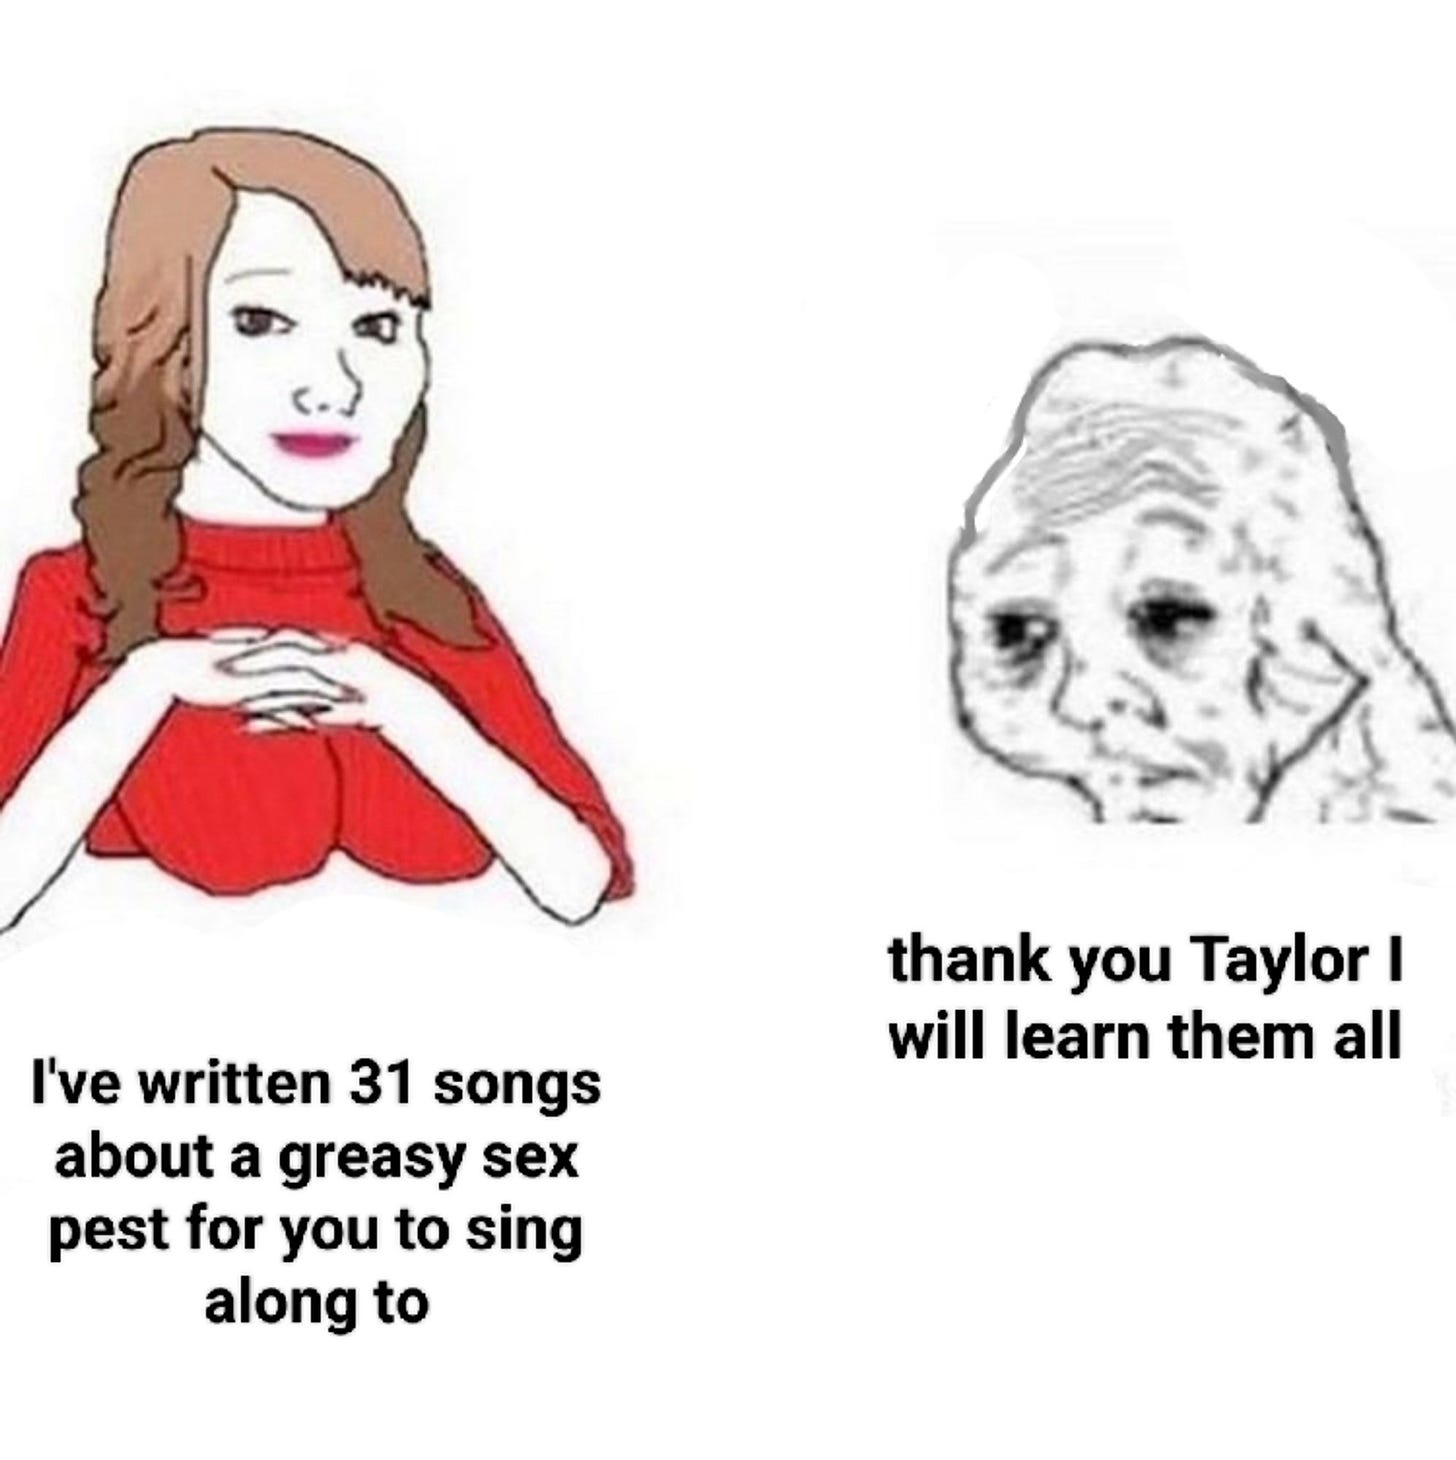 a meme of a woman saying "i've written 31 songs about a greasy sex pest for you to sing along to" and a haggard old person replying, "thank you taylor i will learn them all"